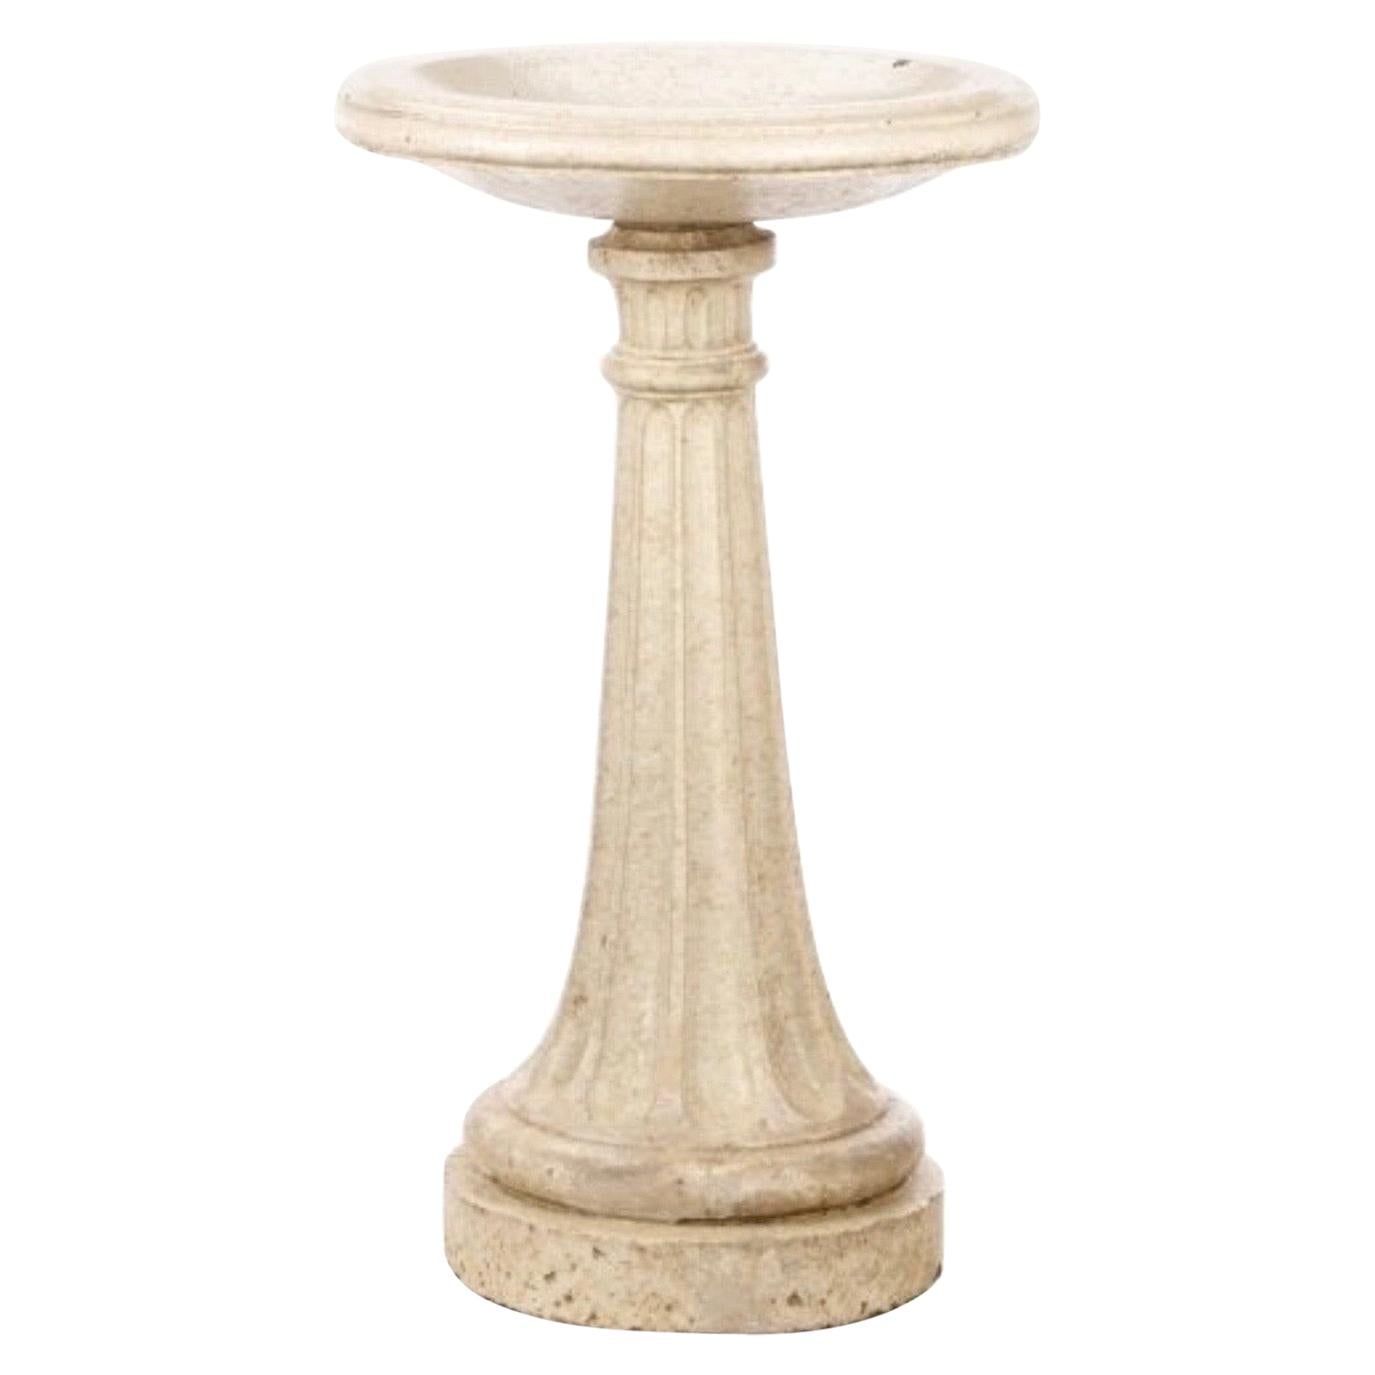 Early 20th Century Neoclassical Glazed Terracotta and Plaster Bird Bath For Sale